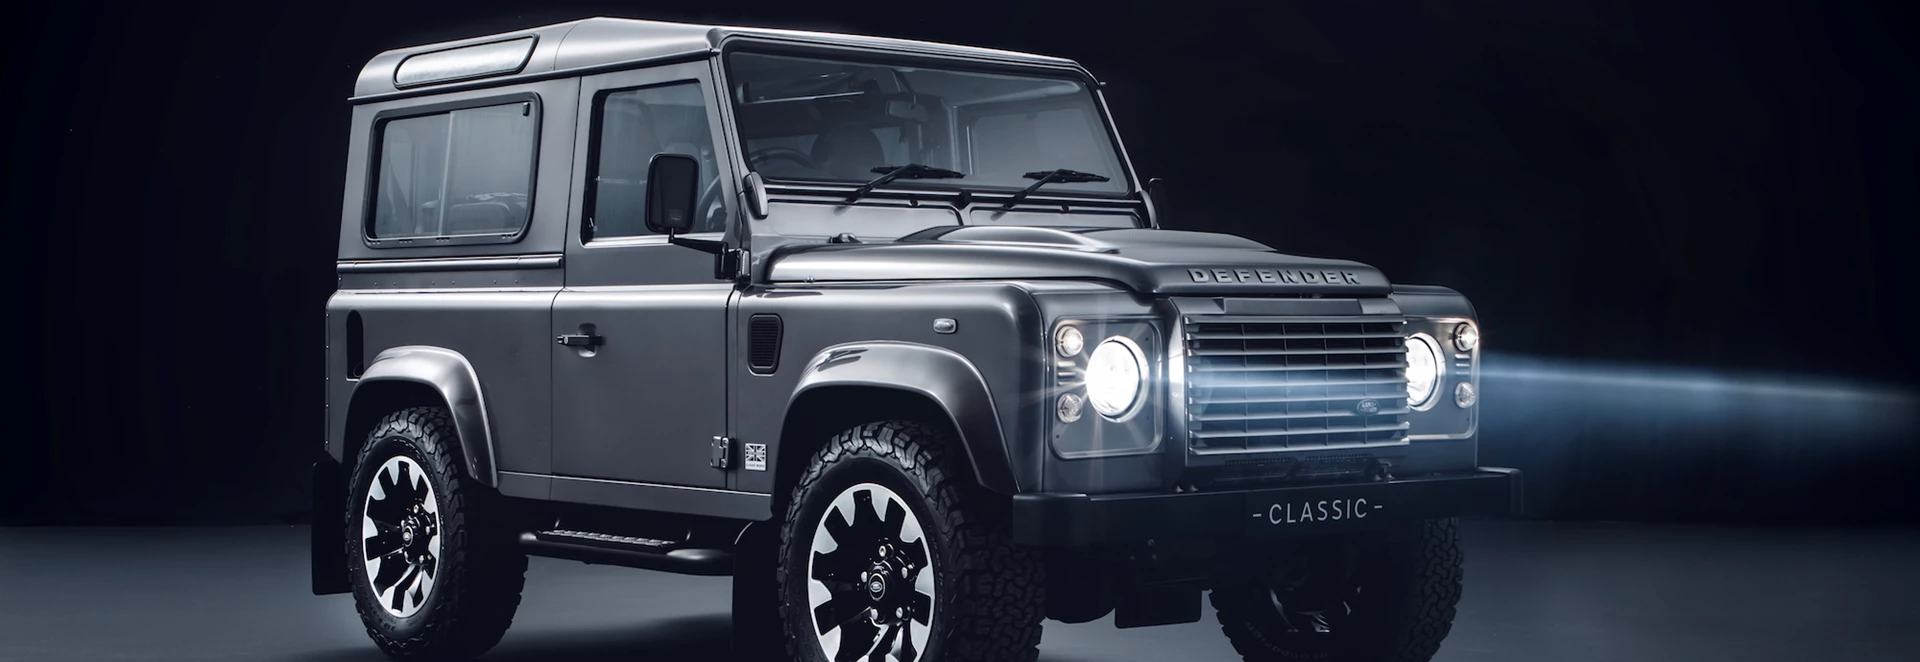 Land Rover Classic introduces retro-fit upgrades for Defender